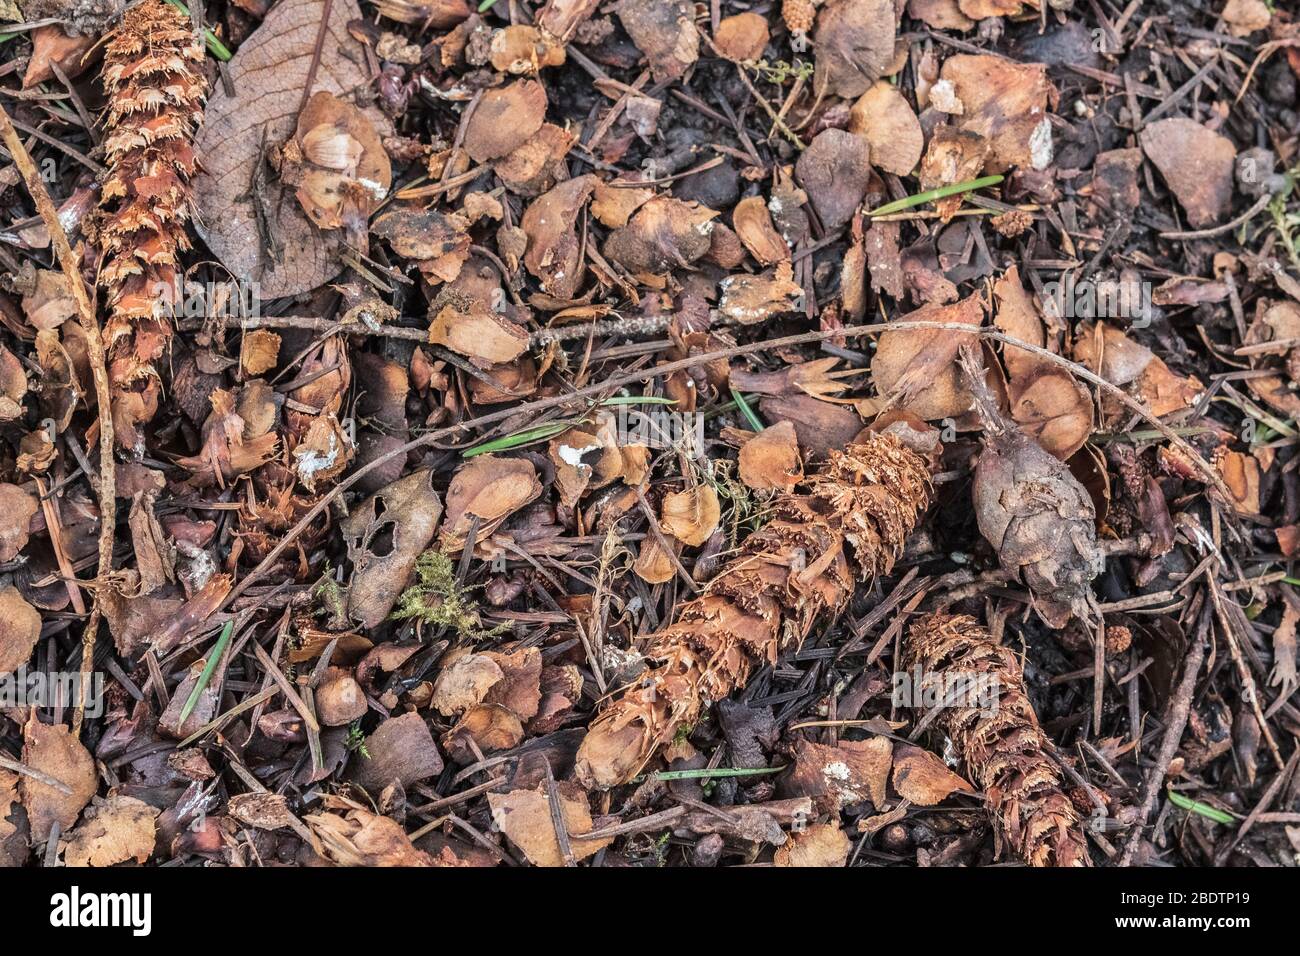 Discarded seed coats and half-eaten Douglas fir cones, left by a Red squirrel, lie in a tangled midden on the forest floor. Stock Photo